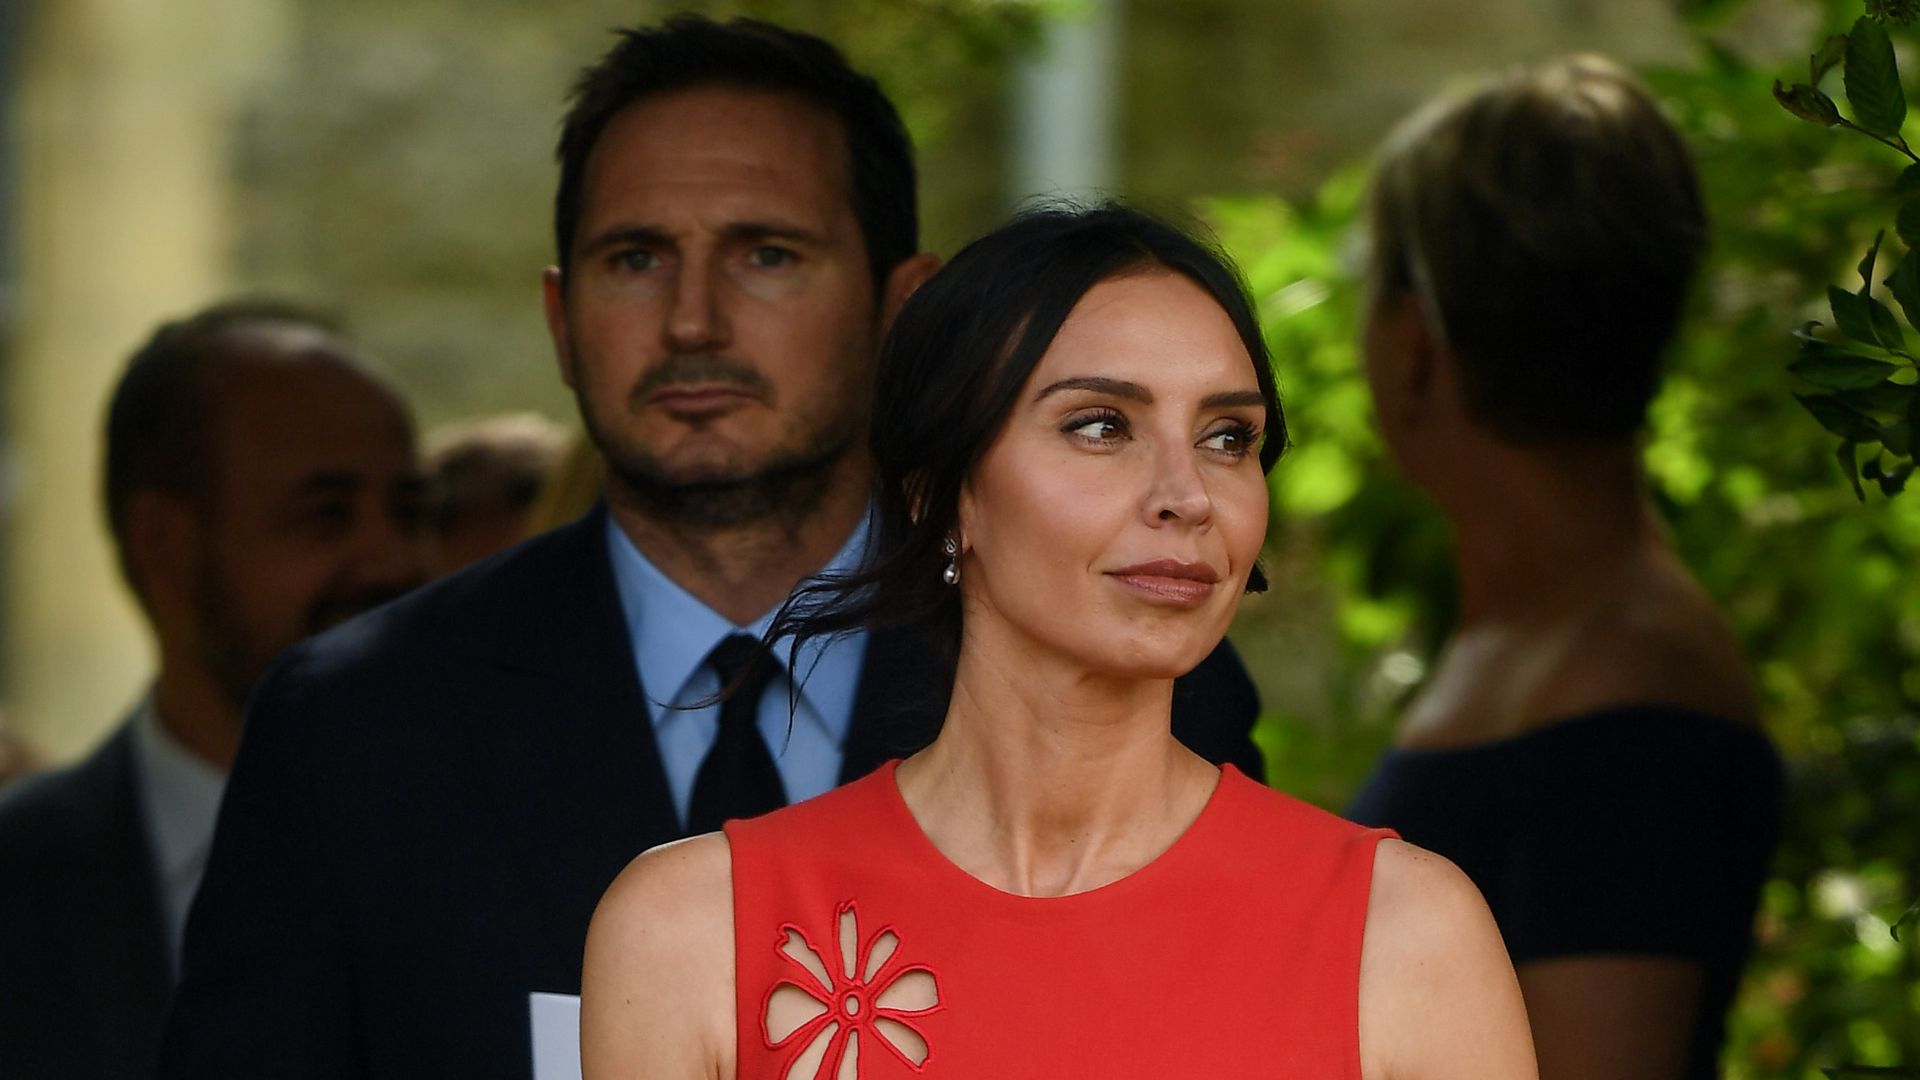 Frank Lampard and Christine Lampard depart St Michael's Church Wedding of Ant McPartlin and Anne-Marie Corbett, 